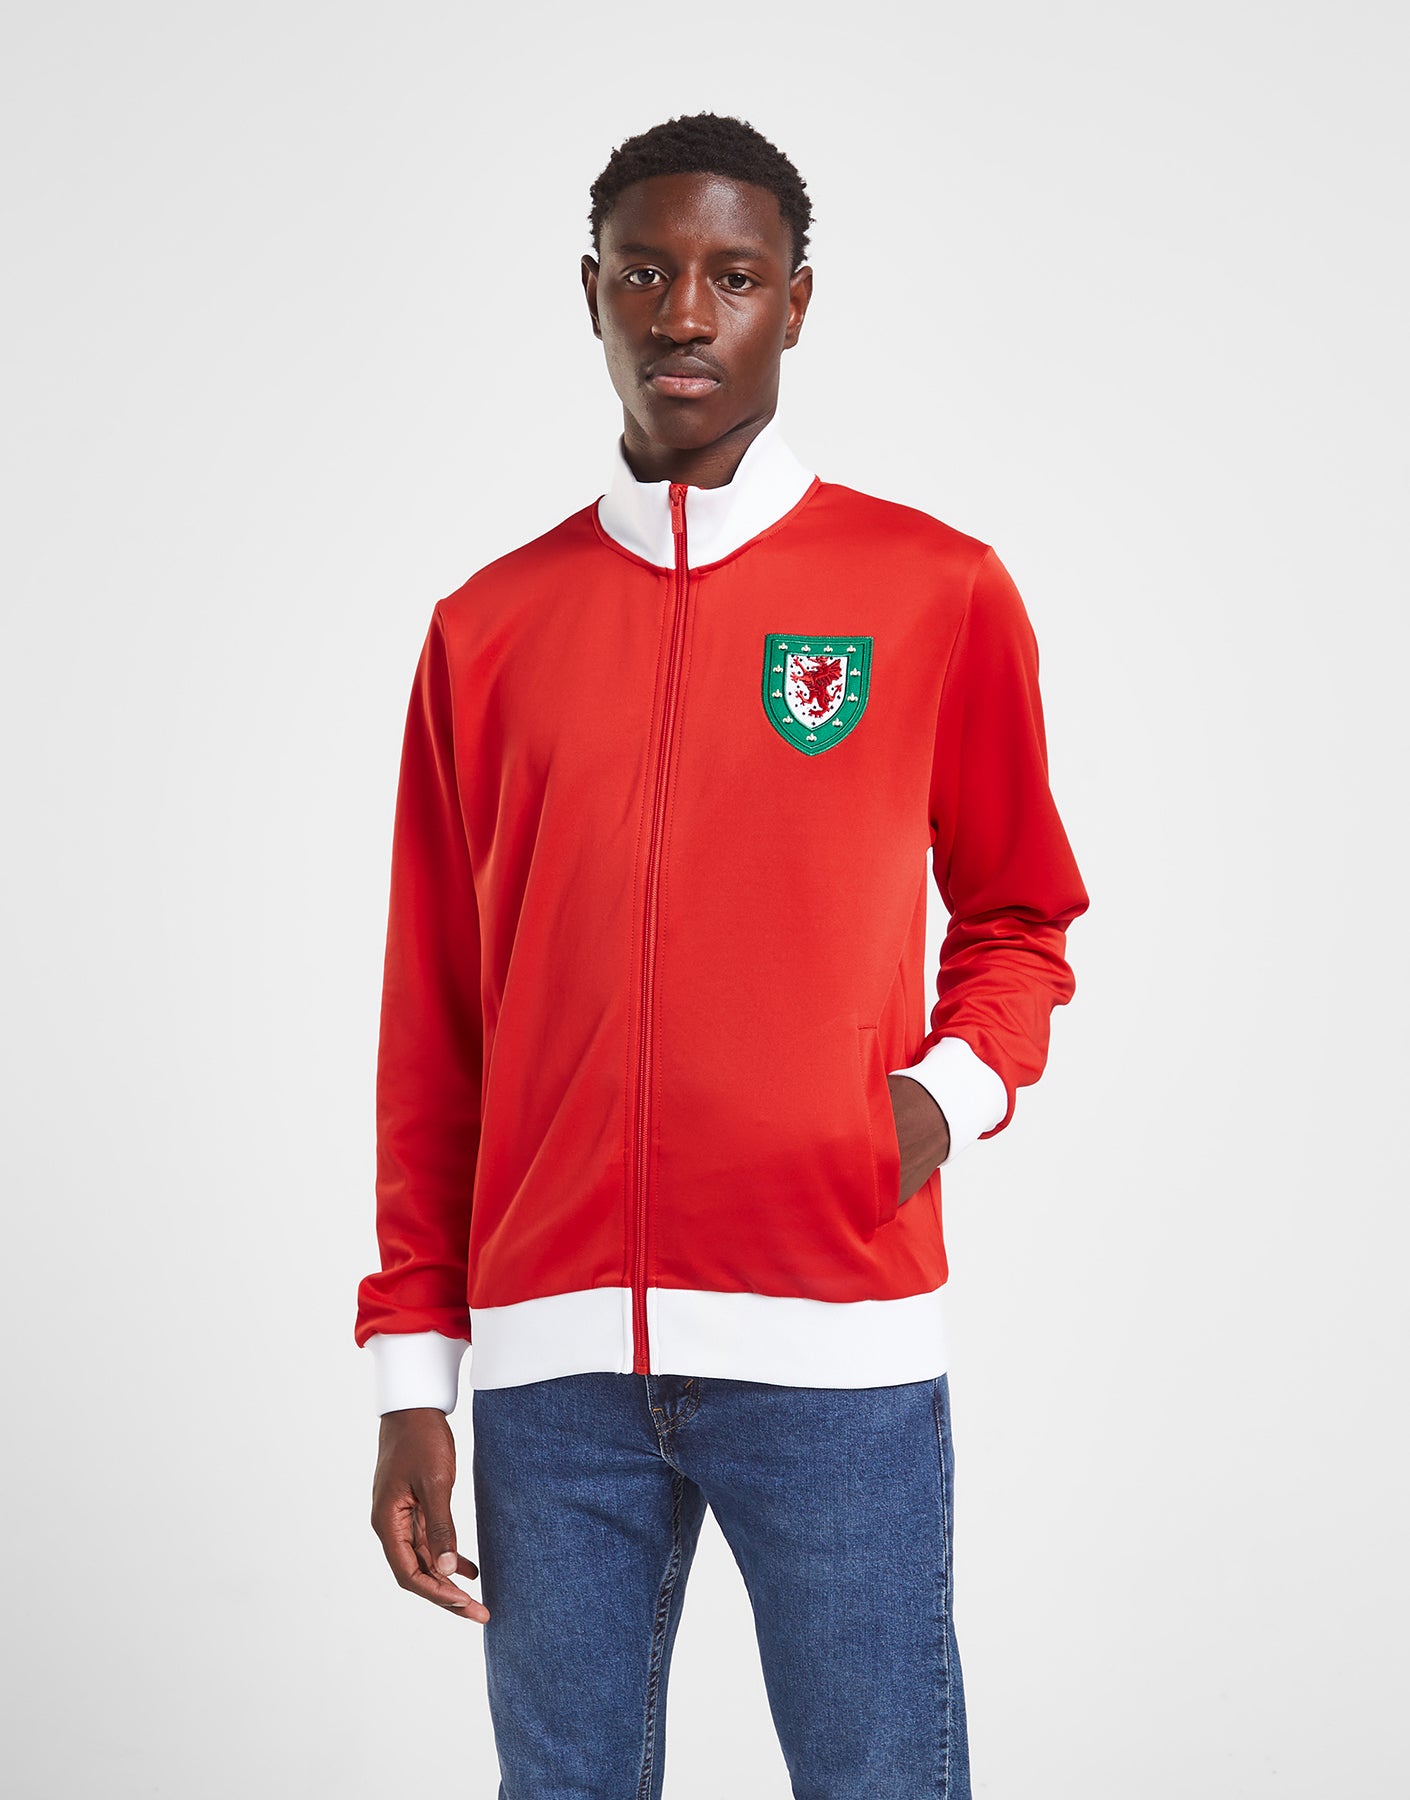 Official Team Wales Retro Track Top - Red - The World Football Store